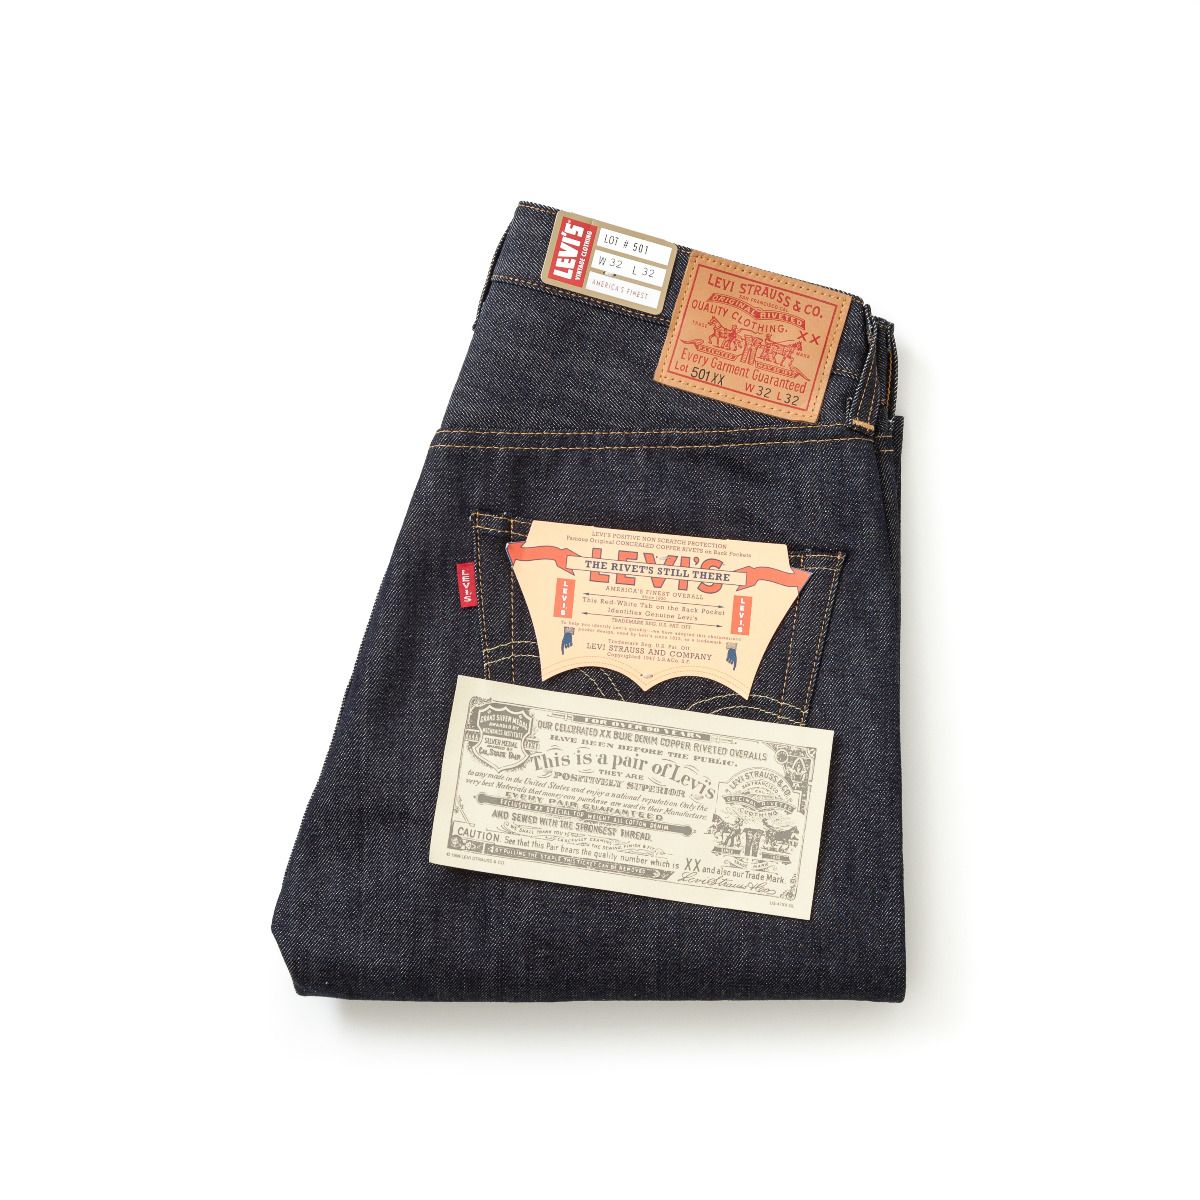 Levi's Vintage Clothing 1947's 501XX JEANS The effect of wearing